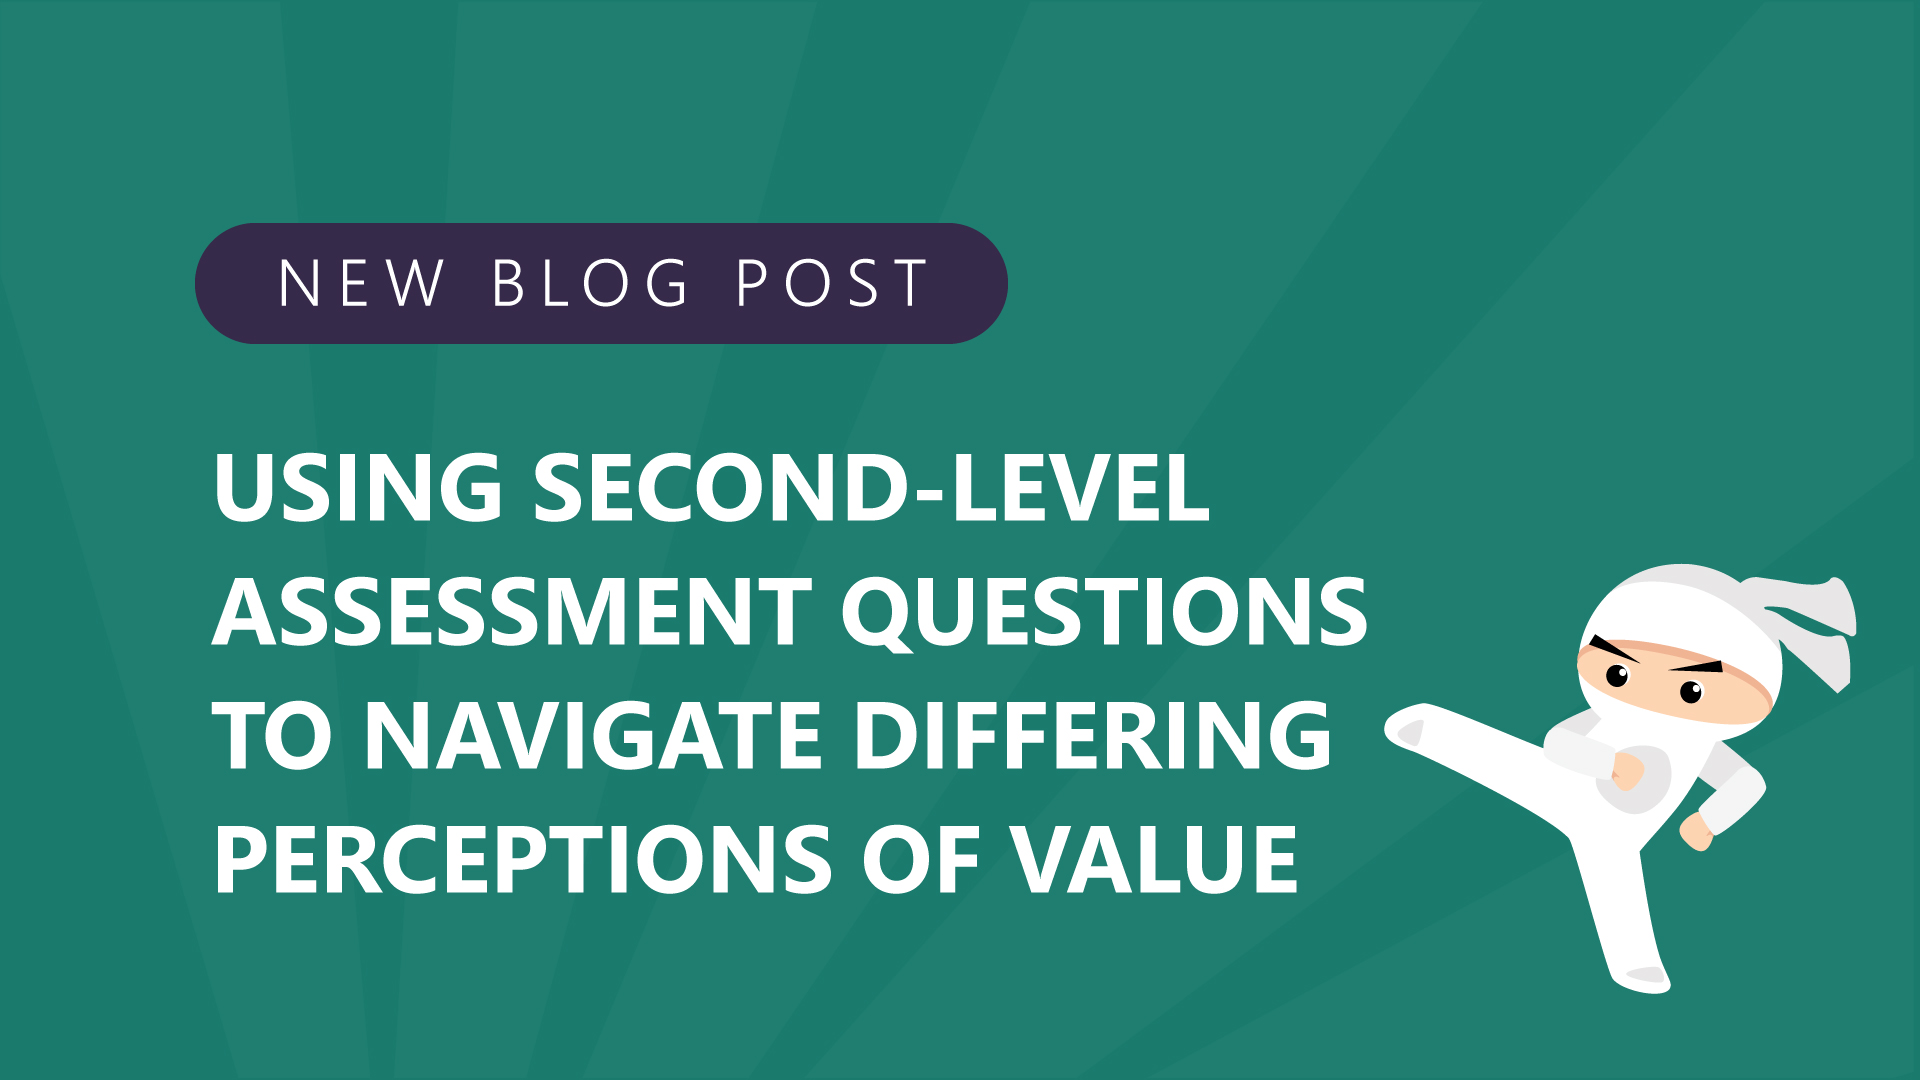 Using-Second-Level-Assessment-Questions-to-Navigate-Differing-Perceptions-of-Value.jpg